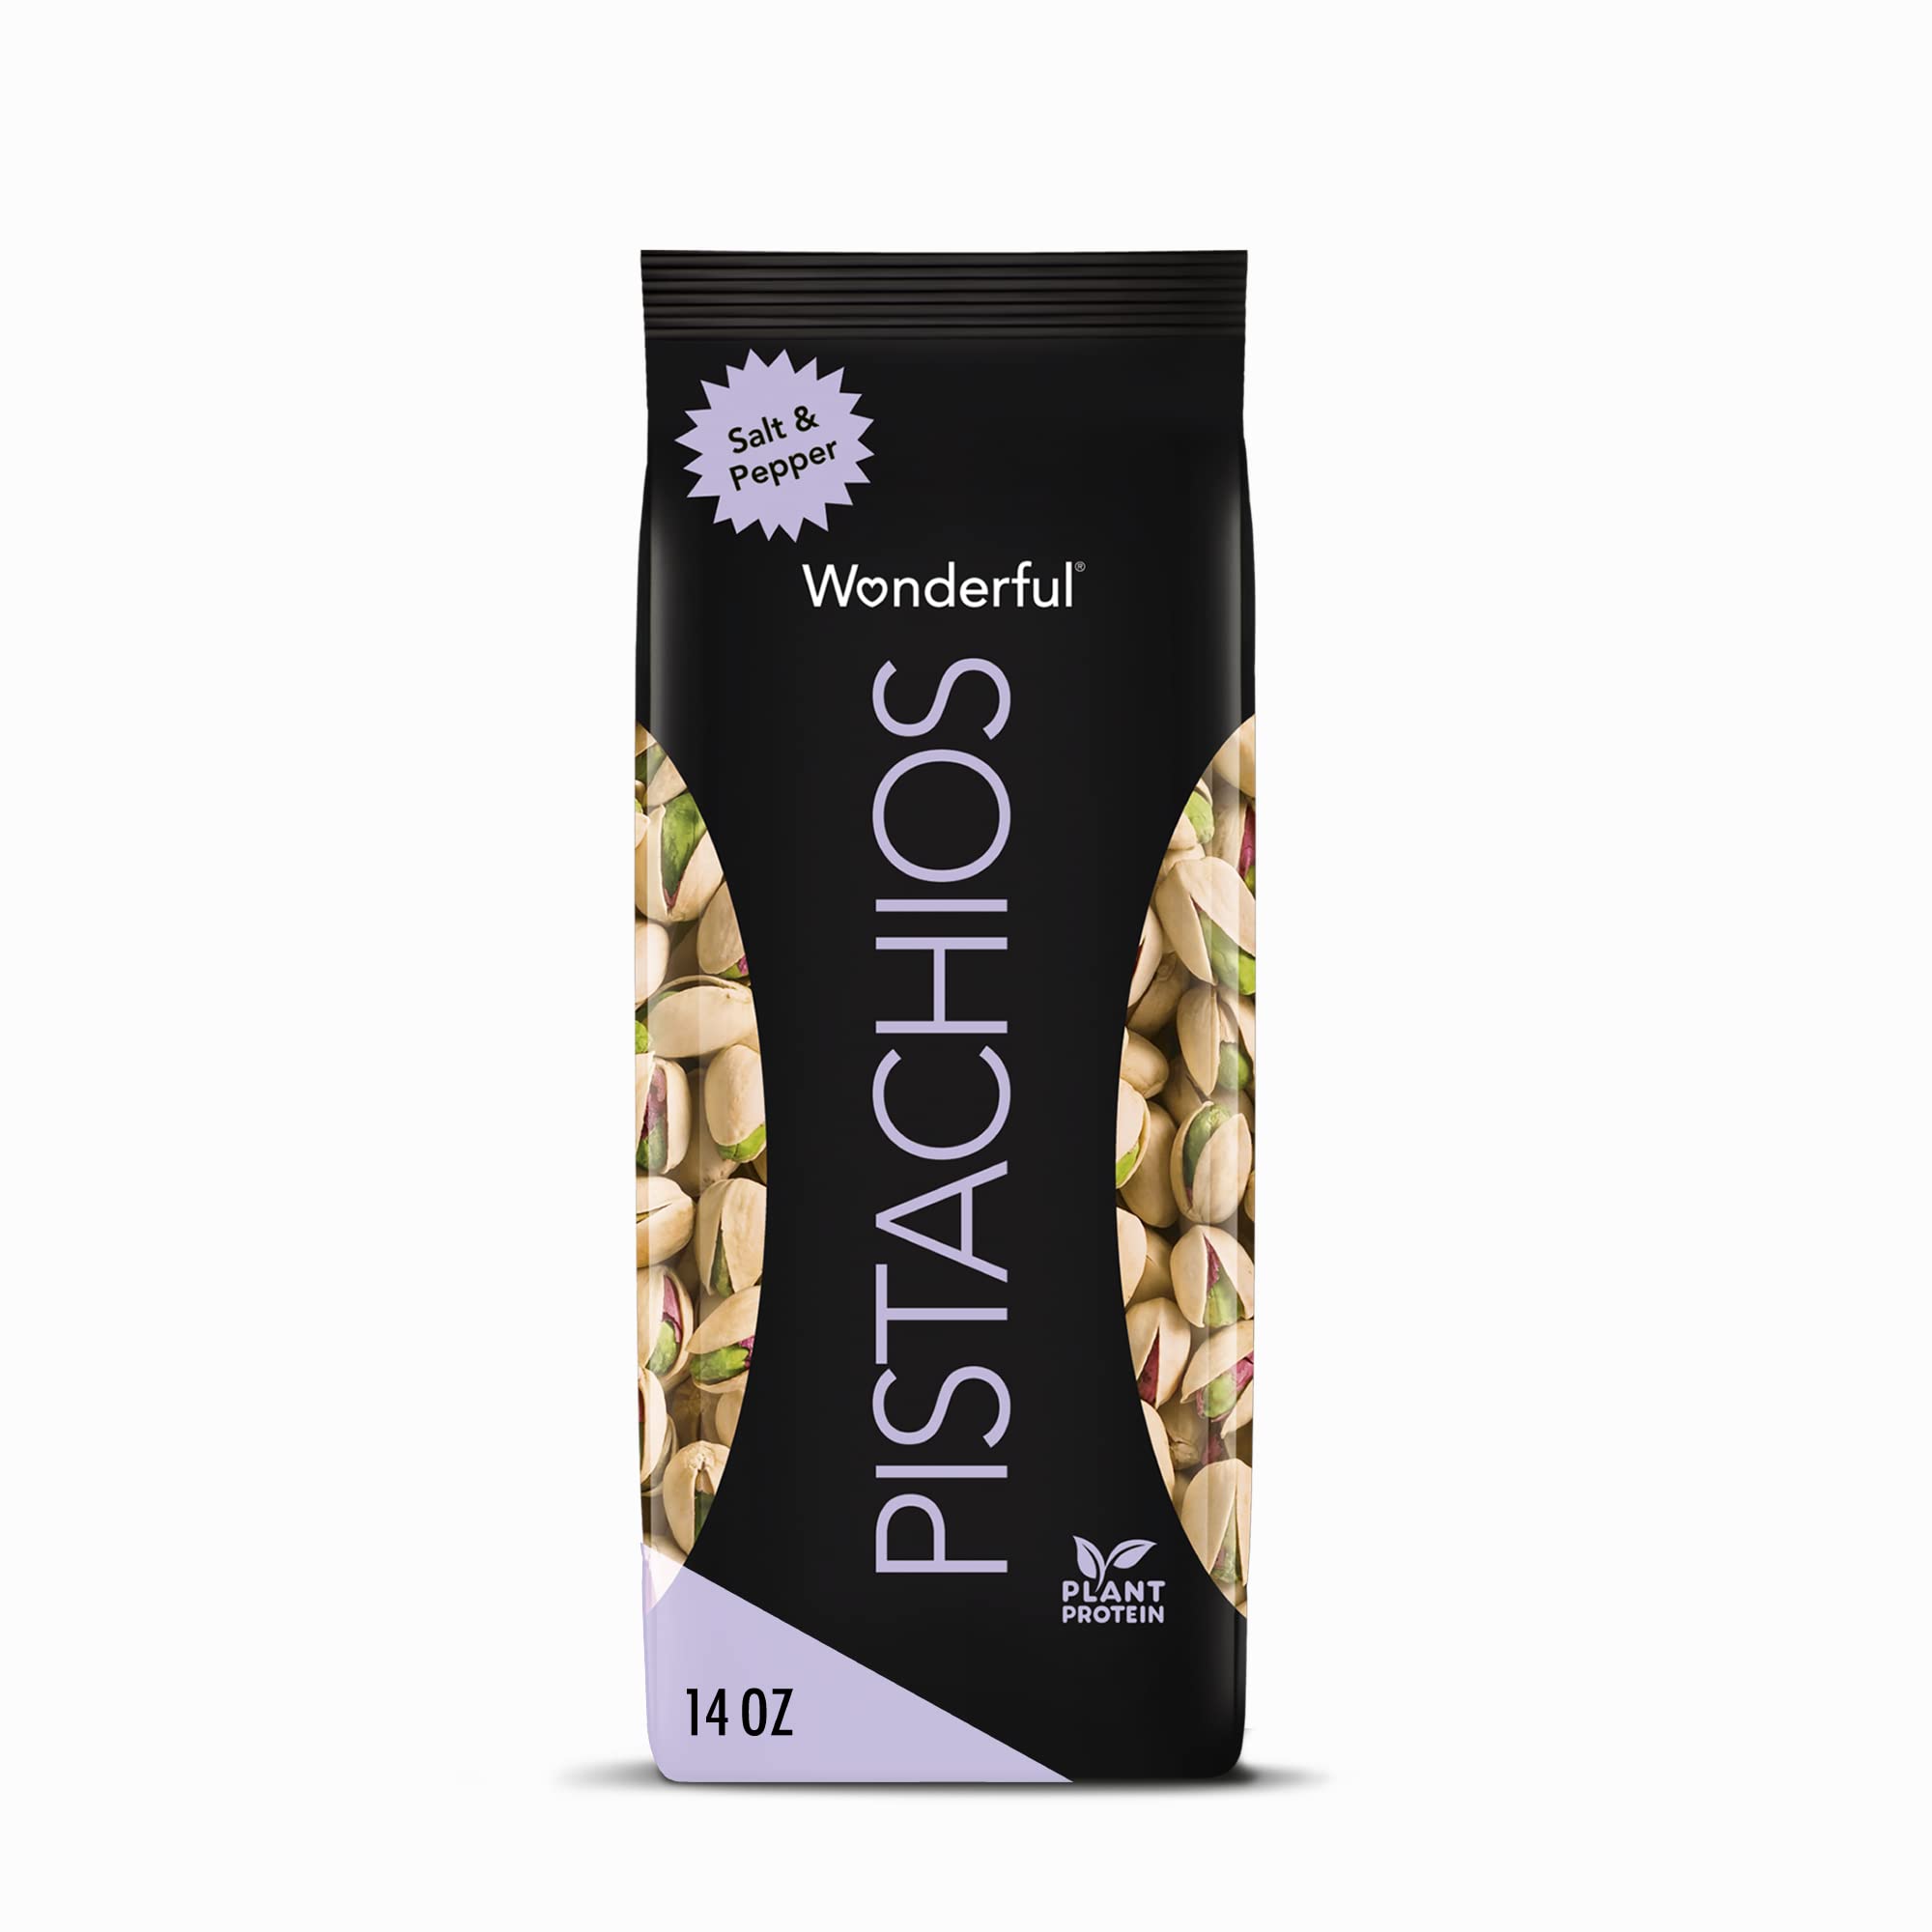 14oz Wonderful Pistachios (In-Shell, Salt & Pepper Nuts) $3.69 w/Subscribe & Save